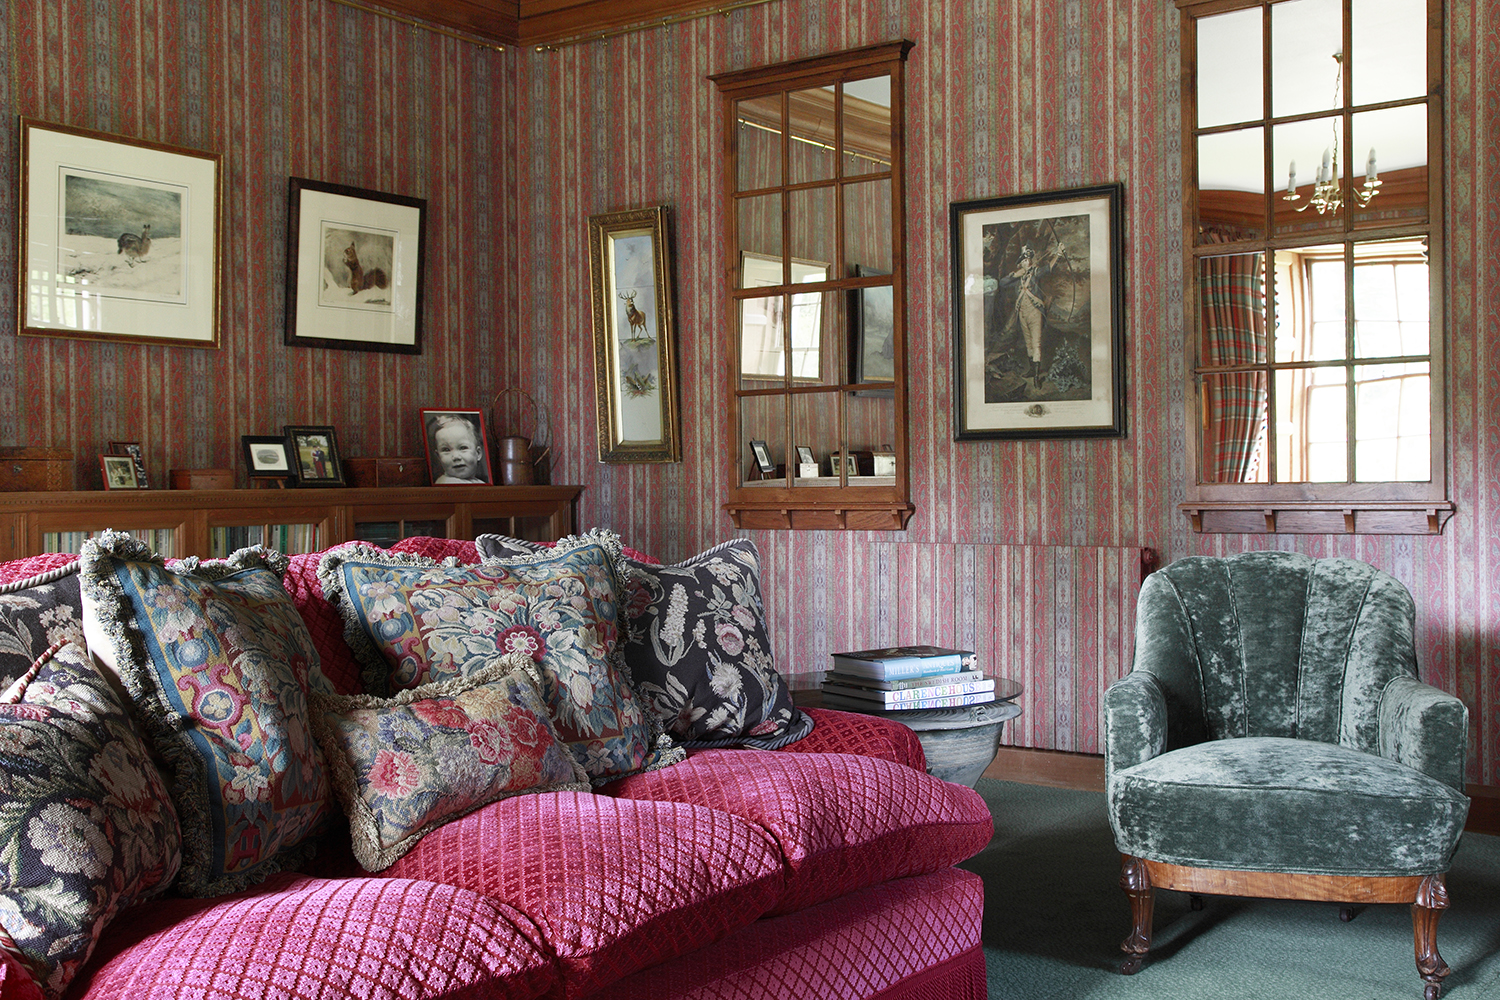 A brightly coloured paisley striped paper sets the tone for sofa and chairs in pinks, red and greens in this cosy room.  